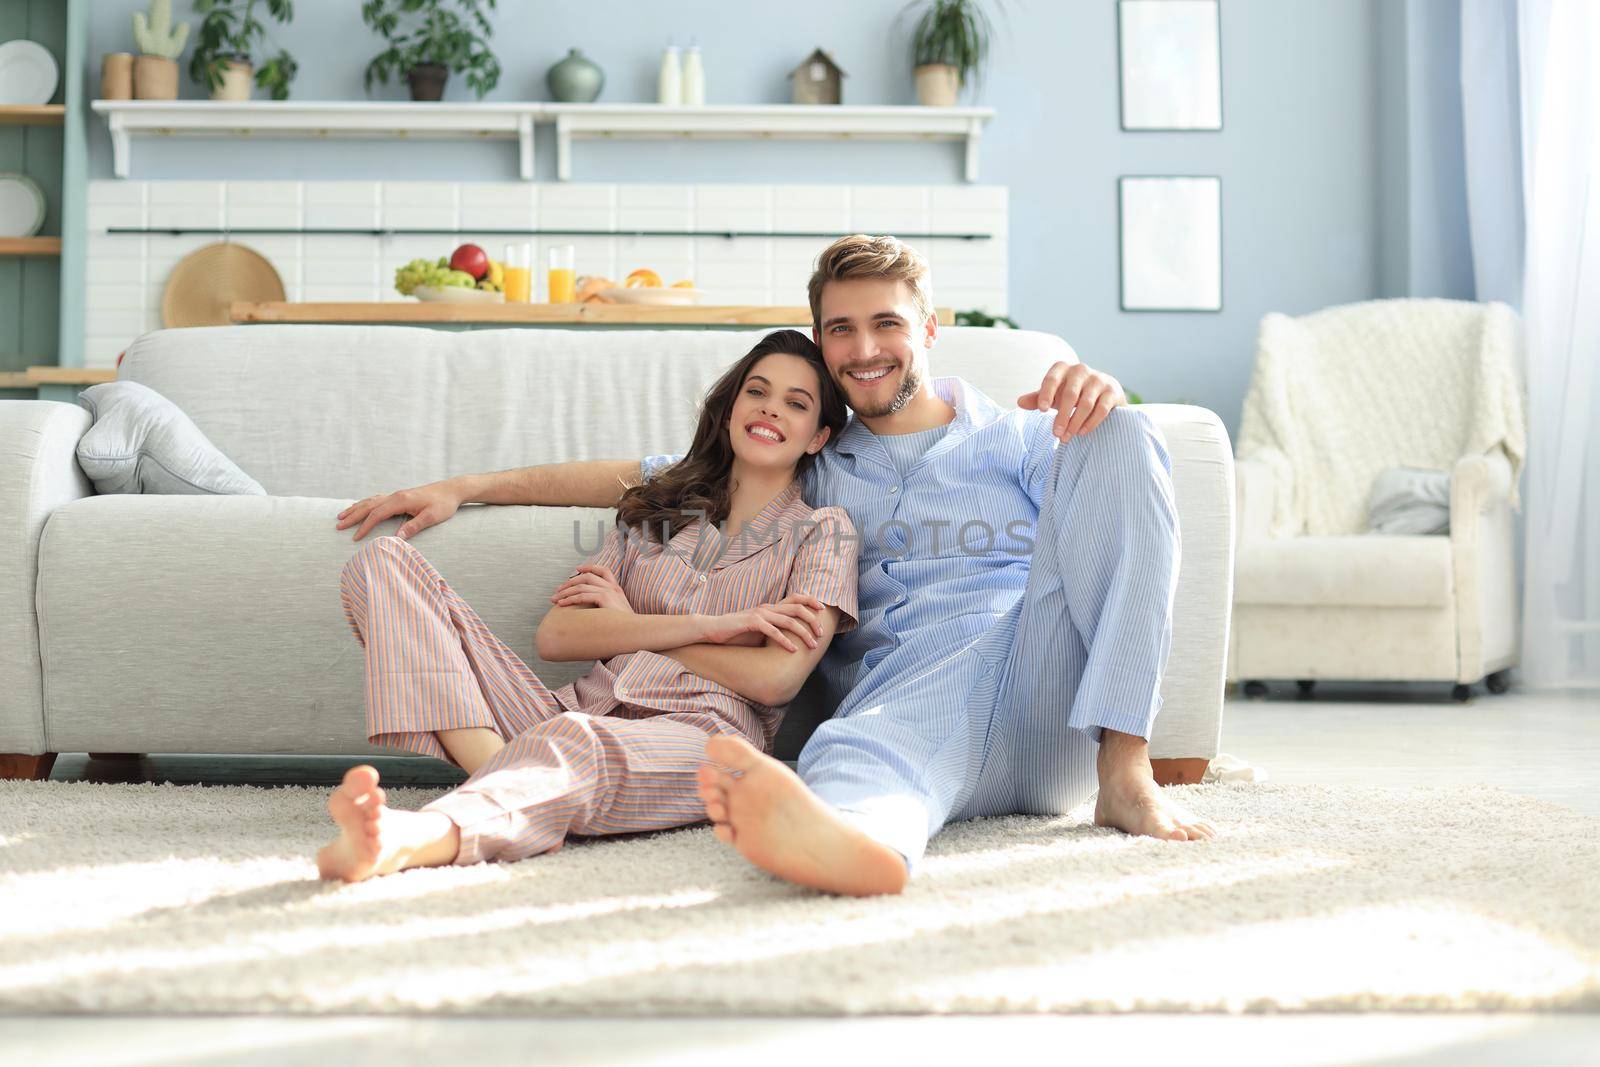 The happy couple in pajamas sitting on the floor background of the sofa in the living room